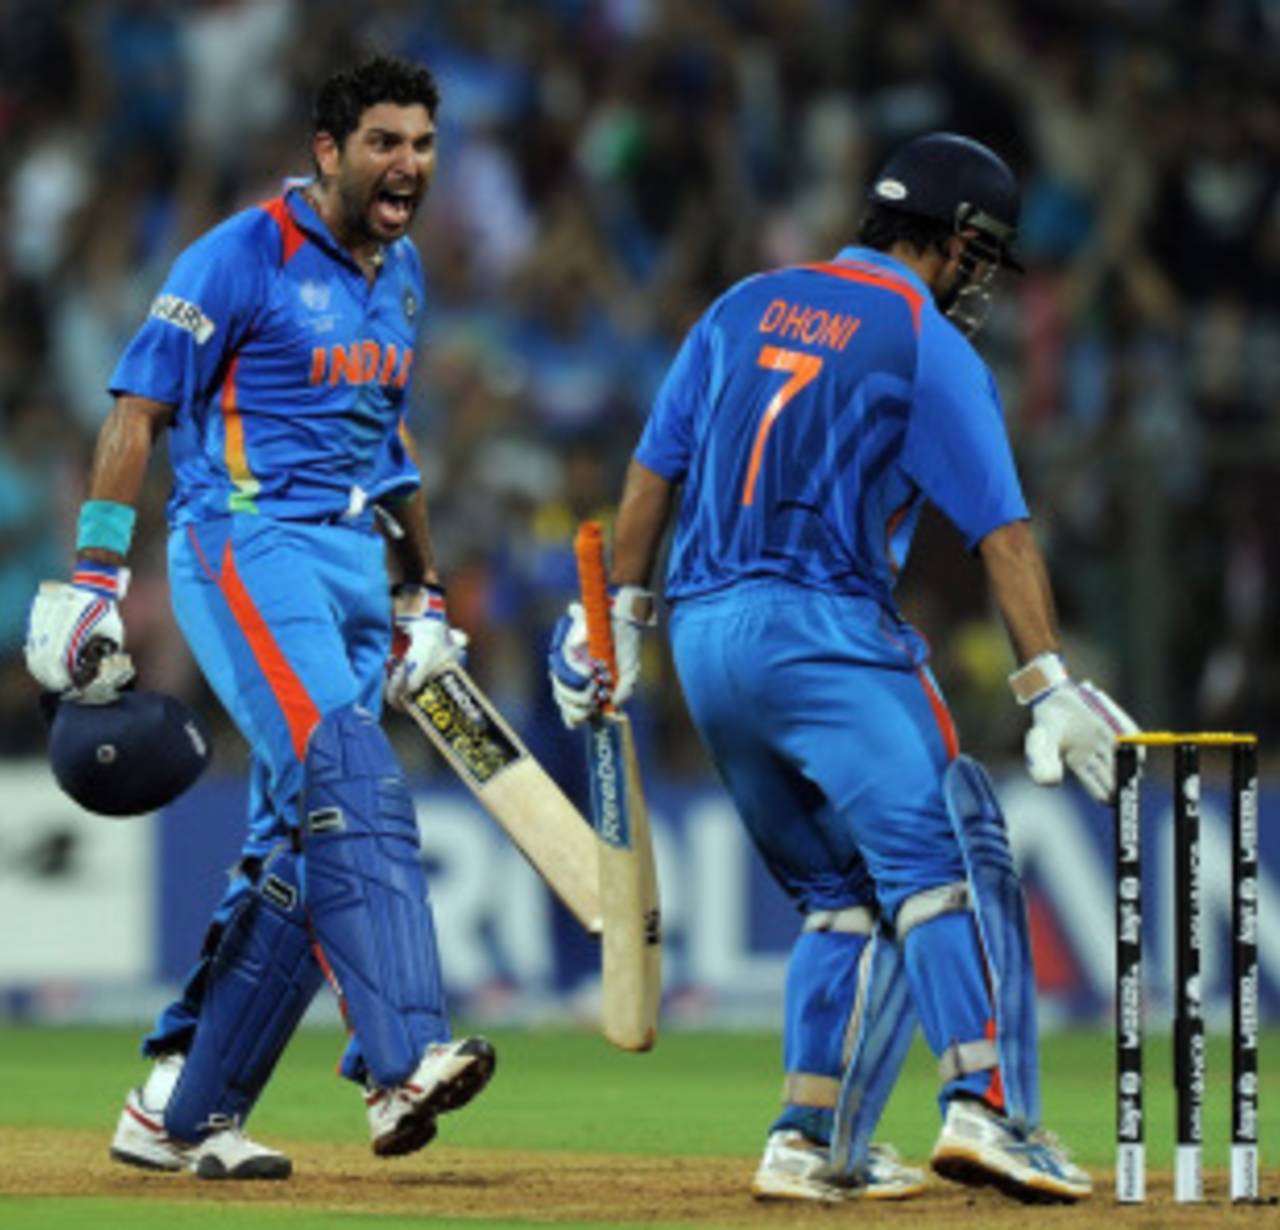 Yuvraj Singh roars as MS Dhoni uproots stumps after taking India to victory in the World Cup final, World Cup 2011, Mumbai, April 2, 2011